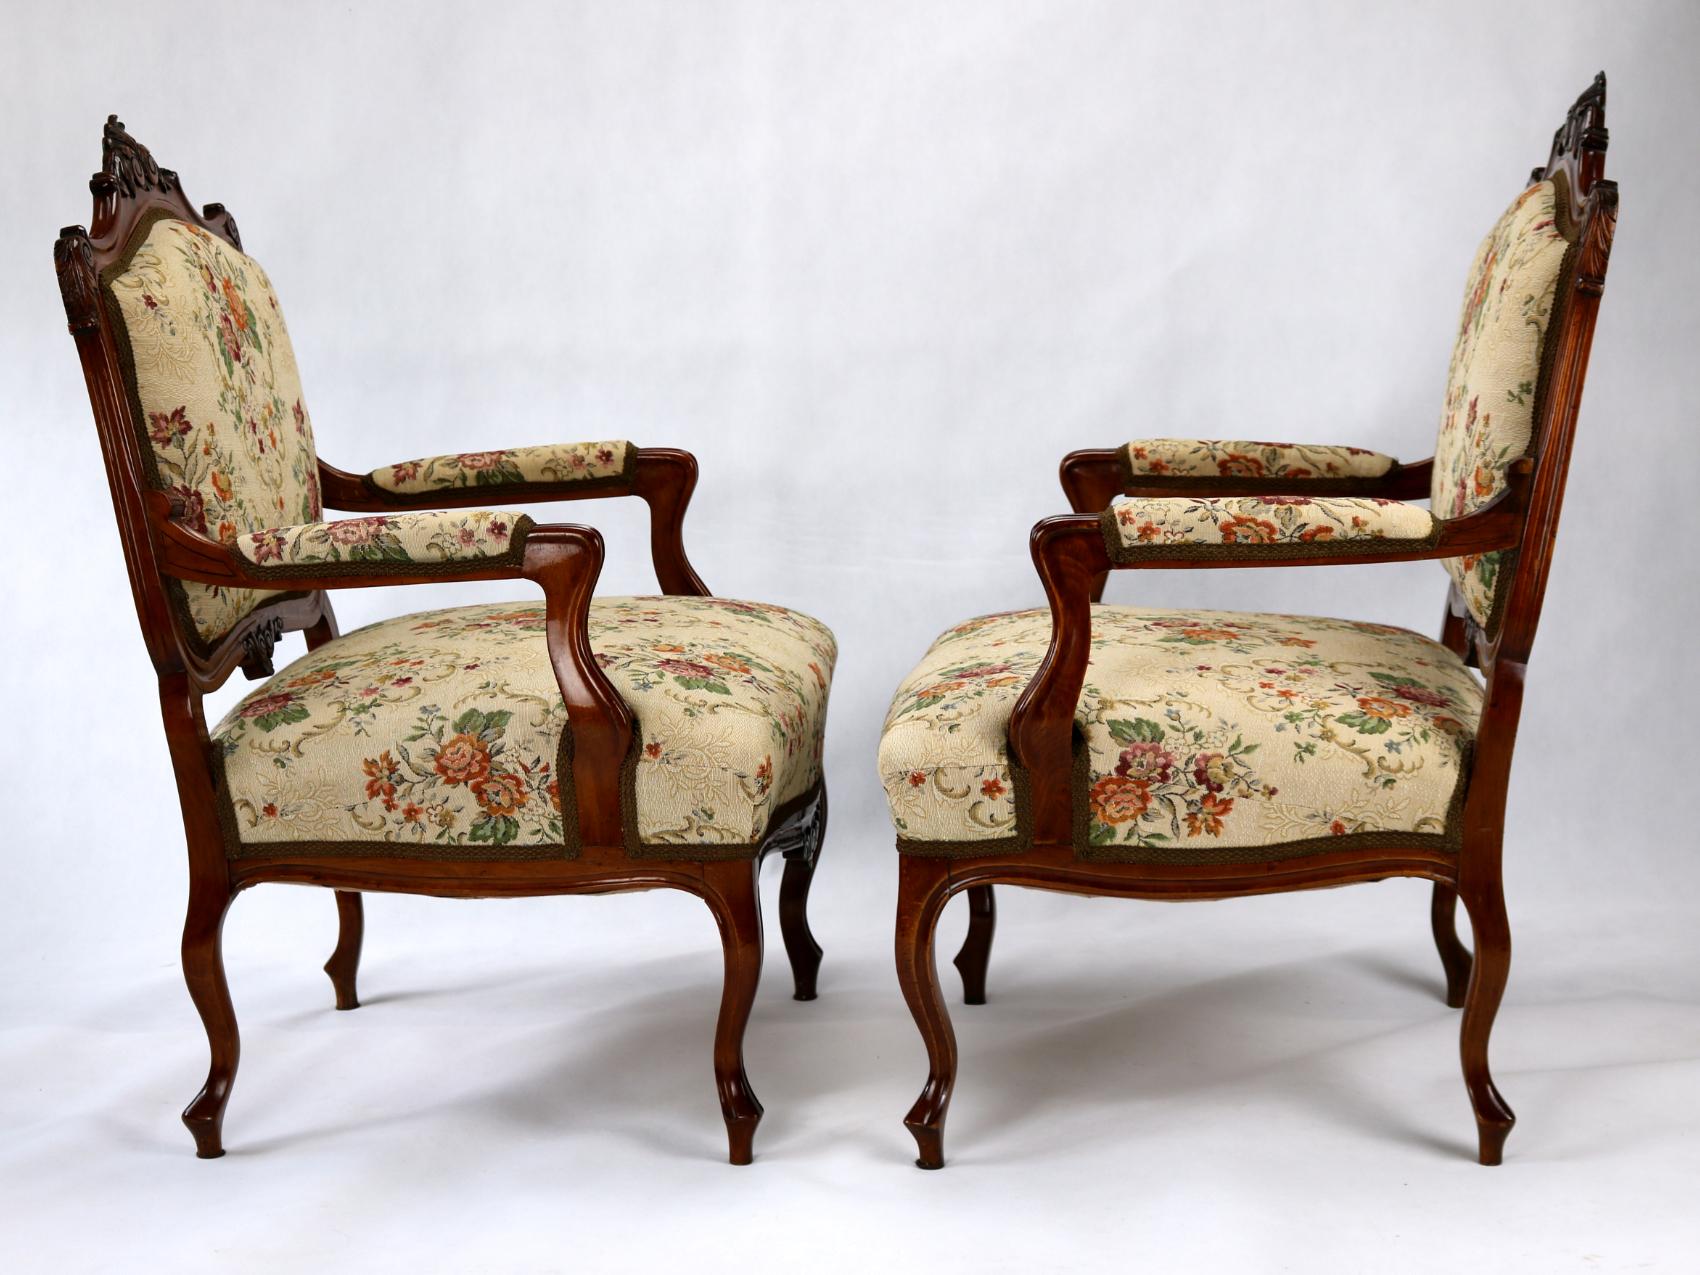 Austrian Pair of Louis XV Rococo Style Carved Walnut Armchairs, circa 1860